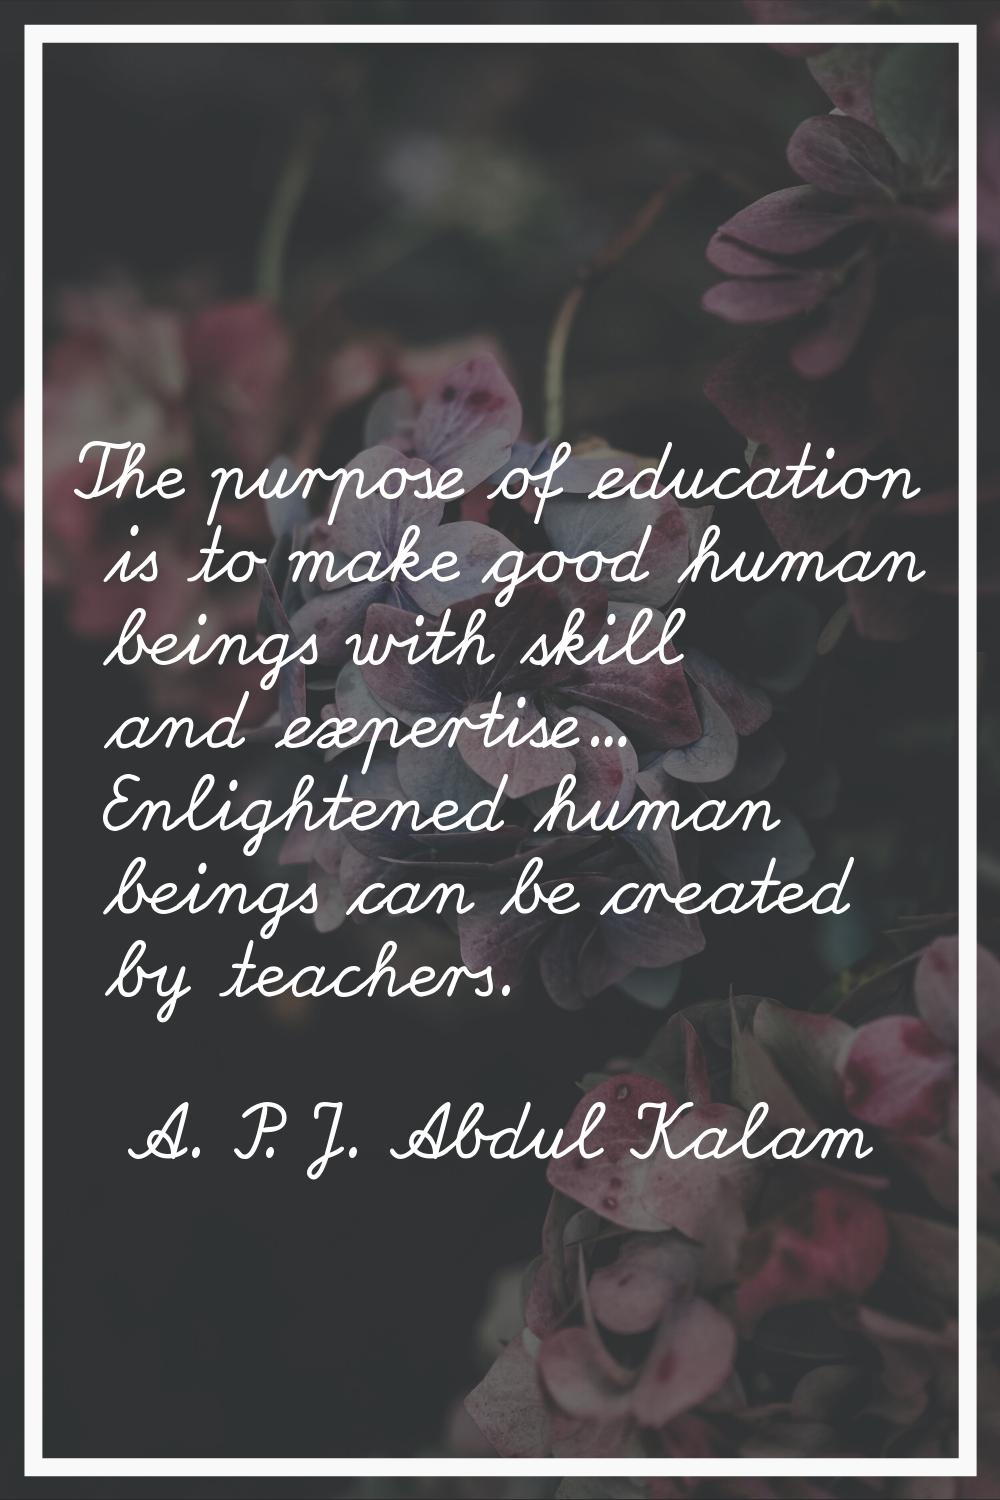 The purpose of education is to make good human beings with skill and expertise... Enlightened human